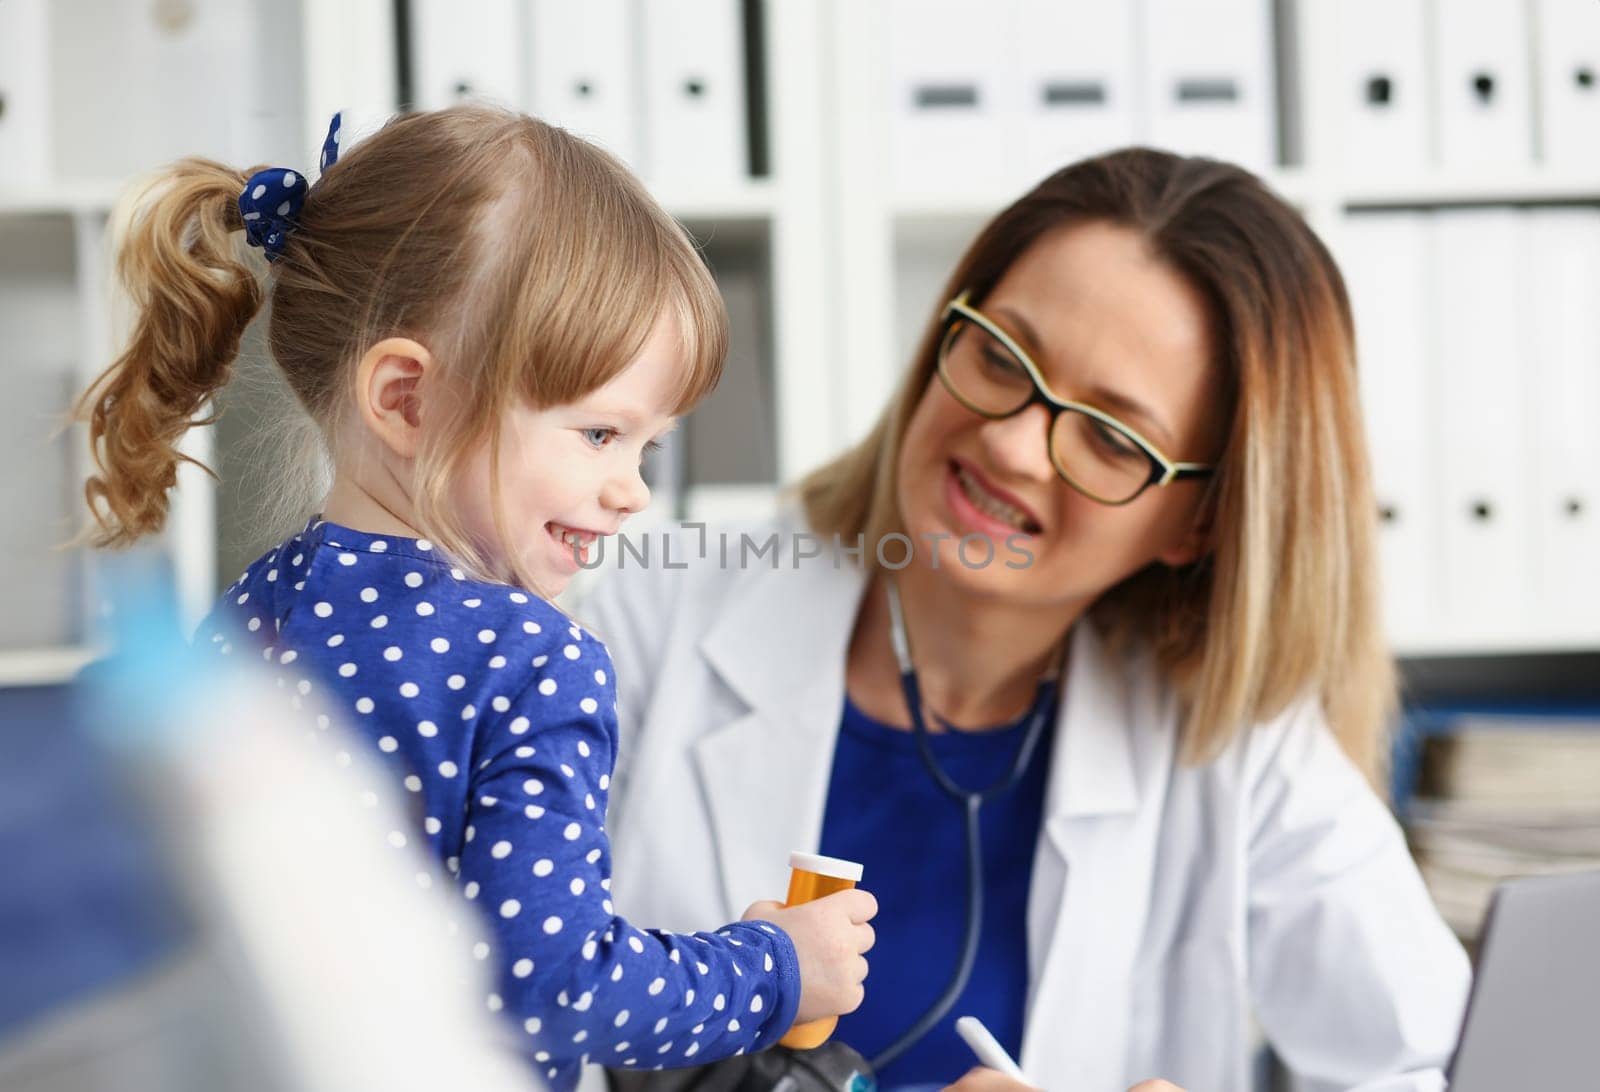 Little child with stethoscope at doctor reception. Physical exam cute infant portrait baby aid healthy lifestyle ward round child sickness specialist clinic test pulse concept